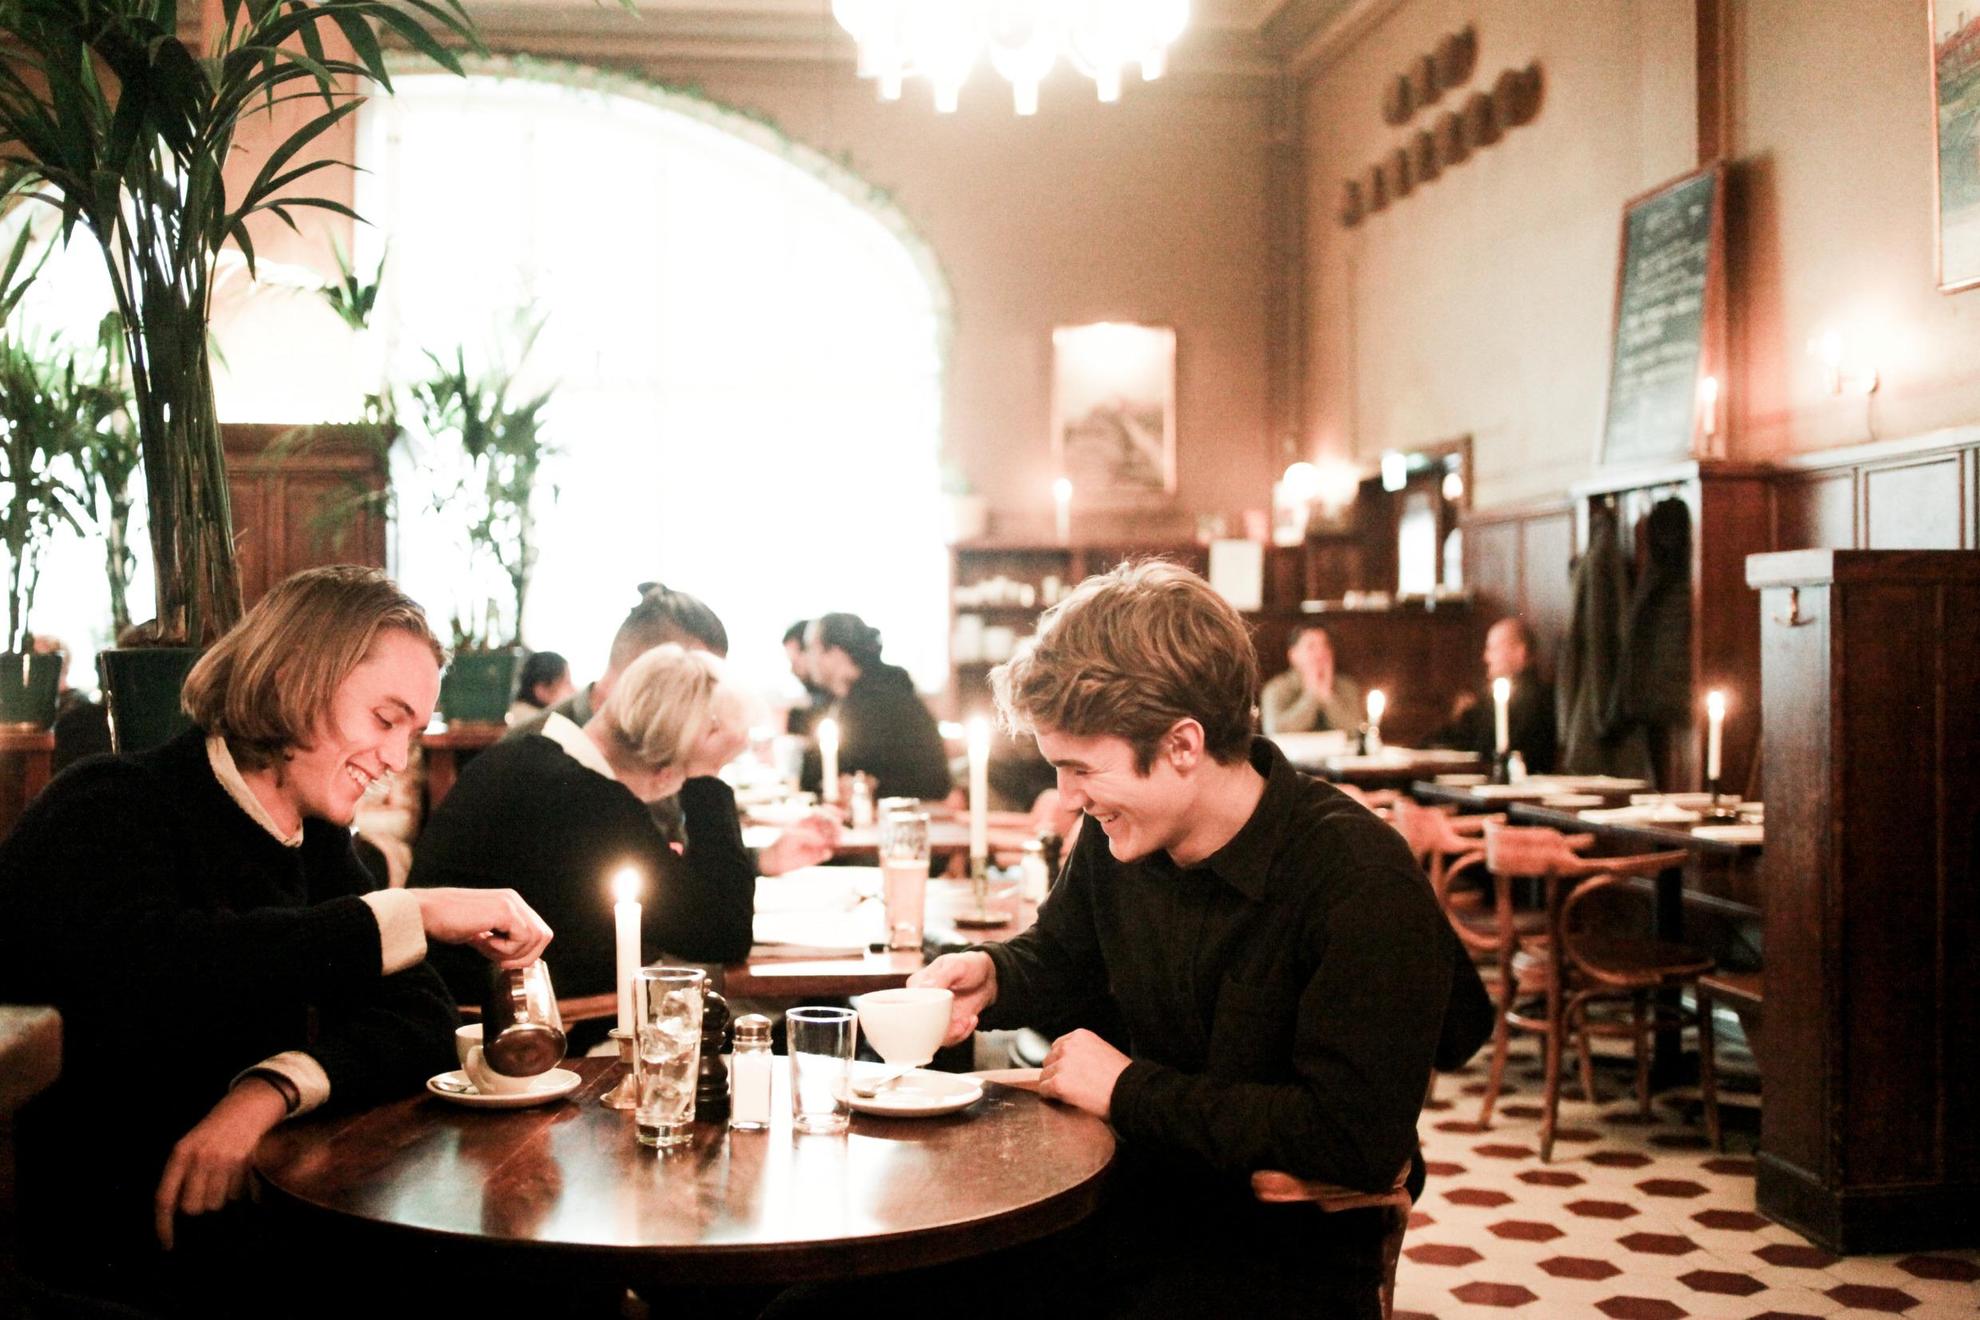 A restaurant setting in Stockholm, where two people in the foreground are enjoying their after-dinner coffee.